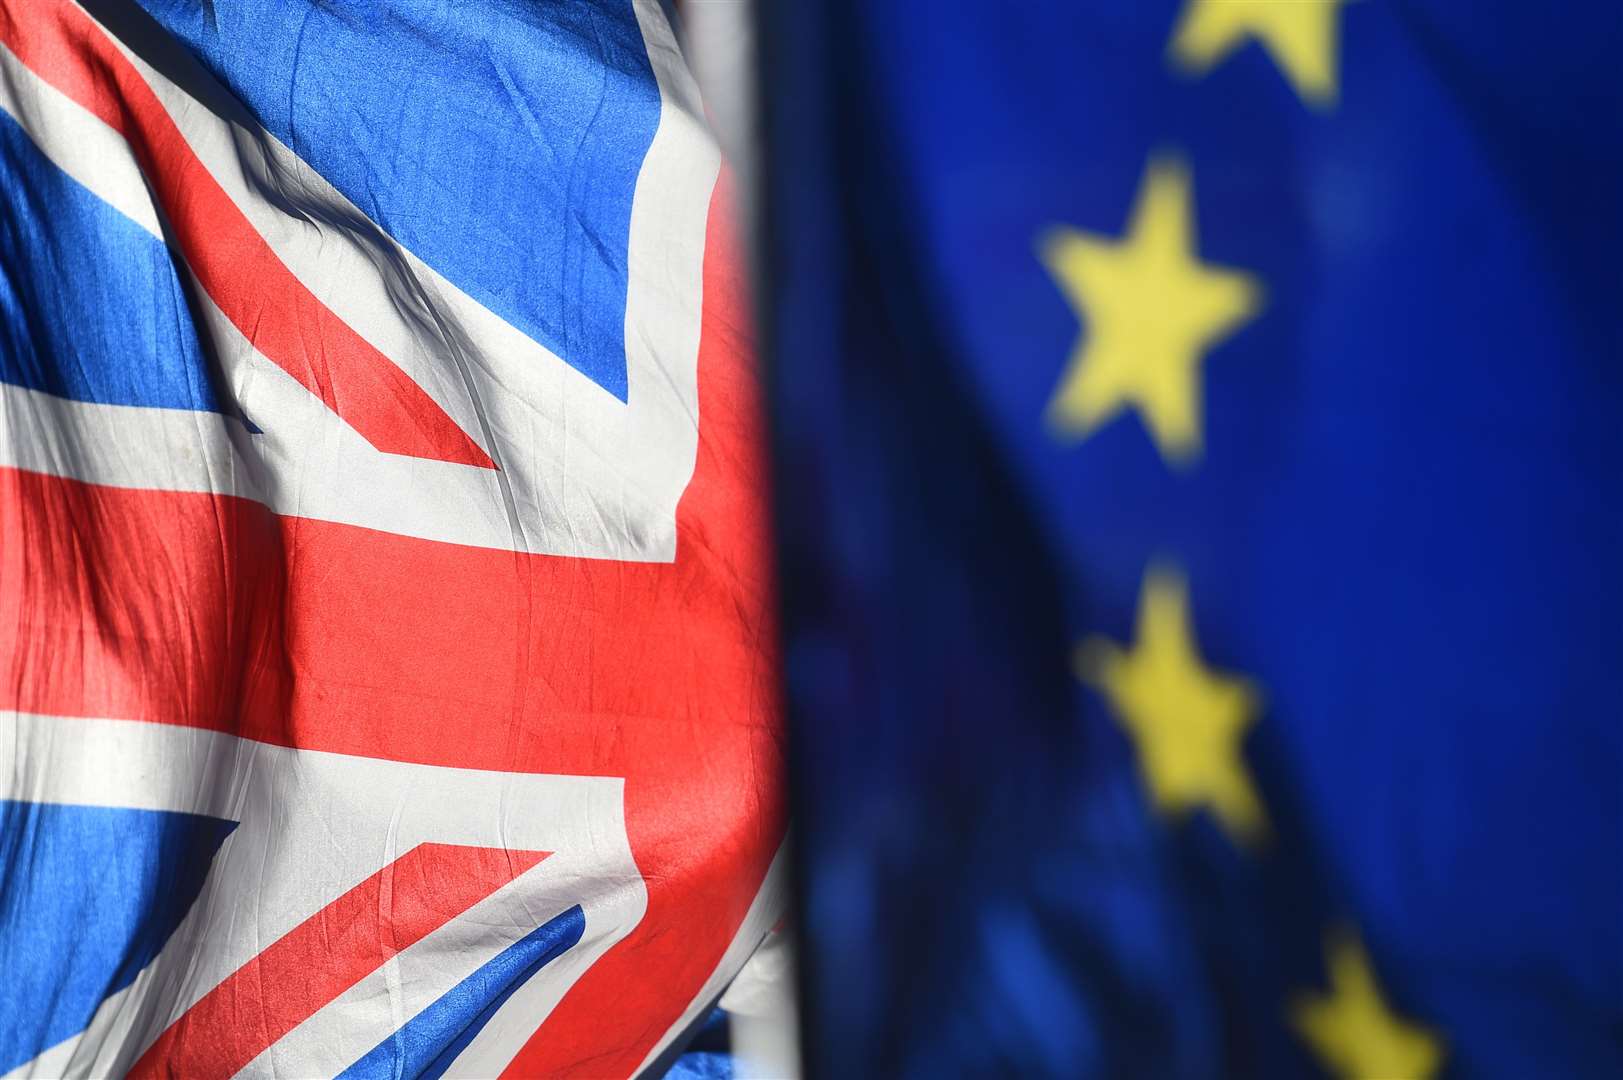 New campaign will help SMEs adjust to changes as a result of Brexit